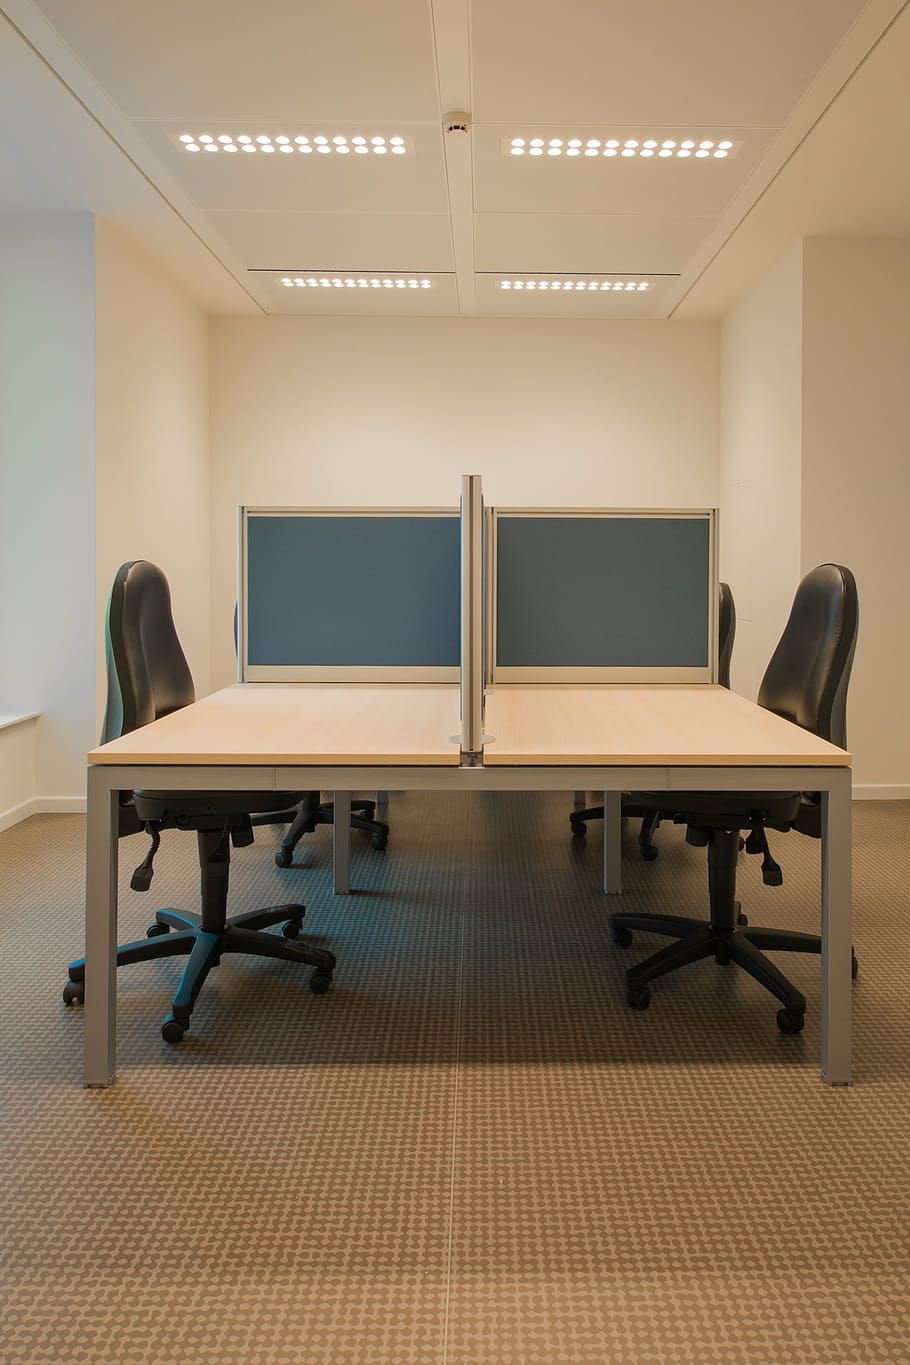 empty, brown, wooden, computer cubicle, office, open space, office room, room, corporate, business